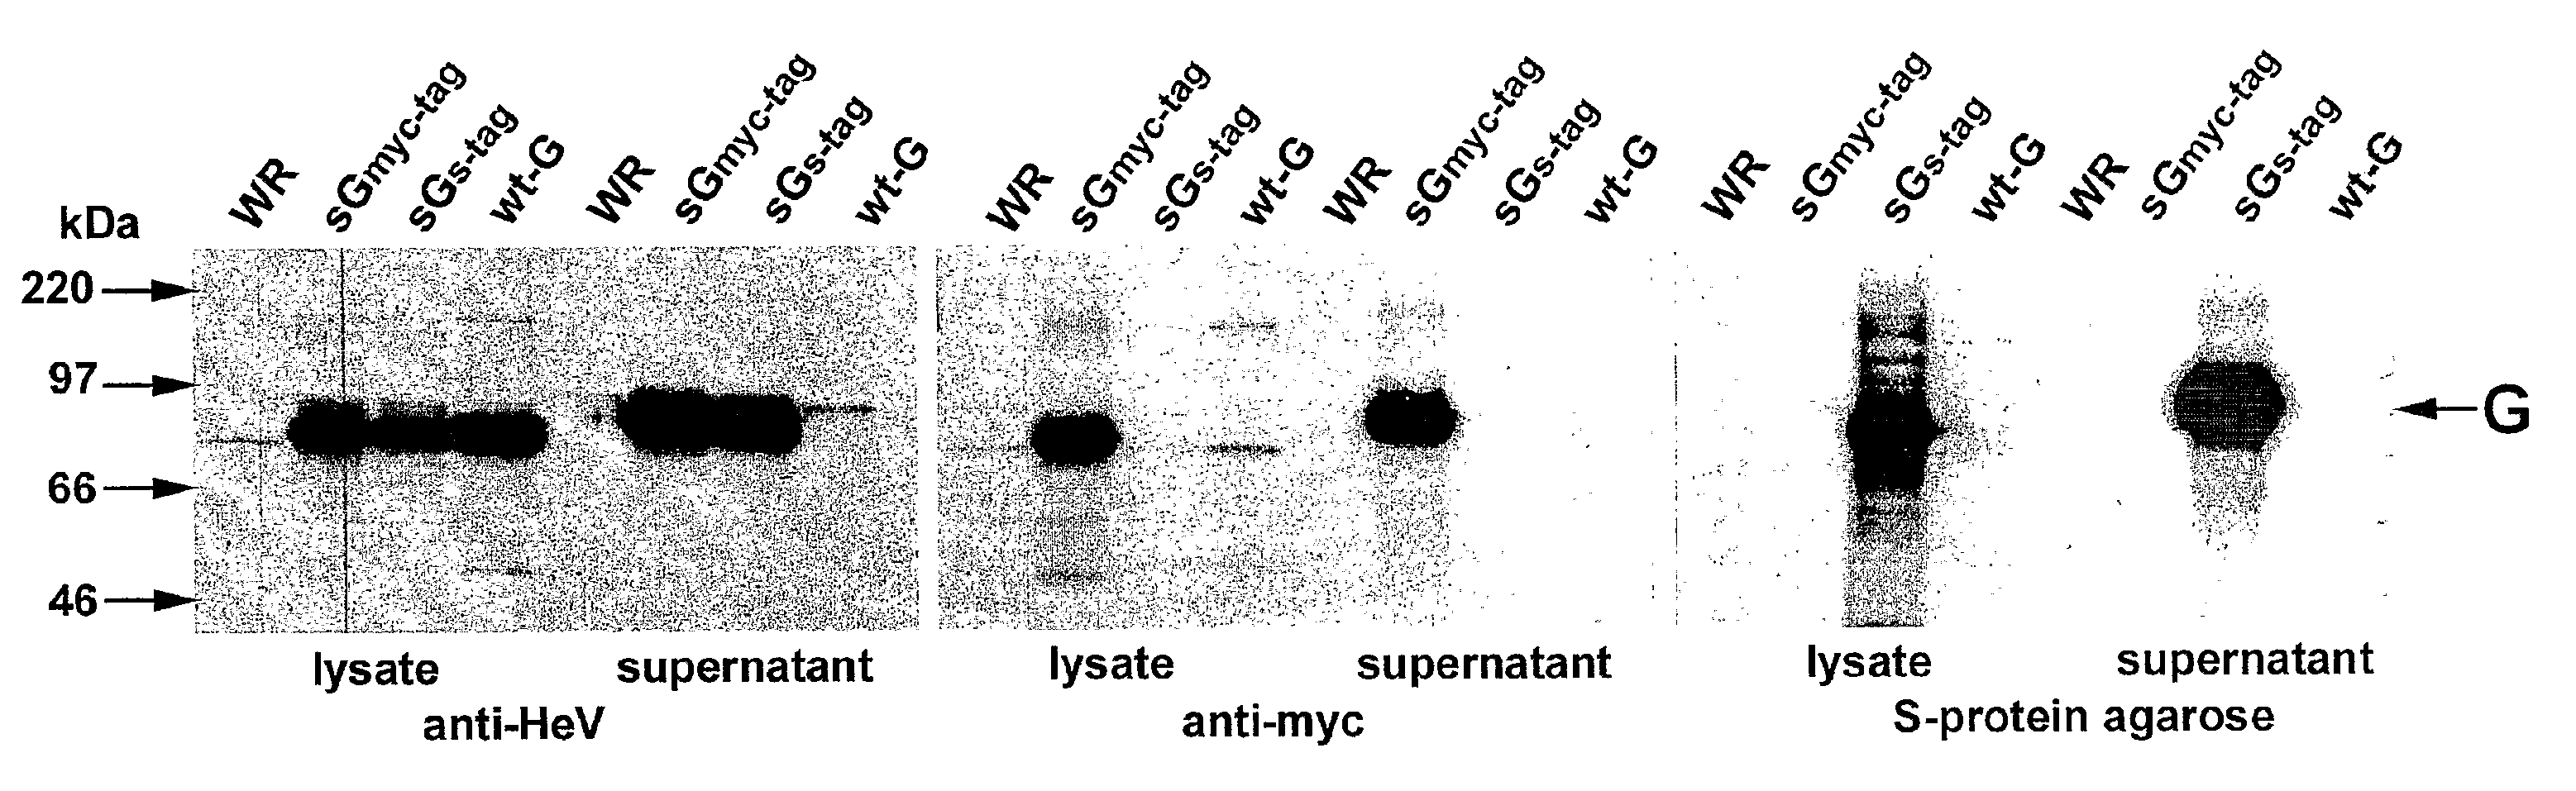 Soluble Forms of Hendra and Nipah Virus G Glycoprotein